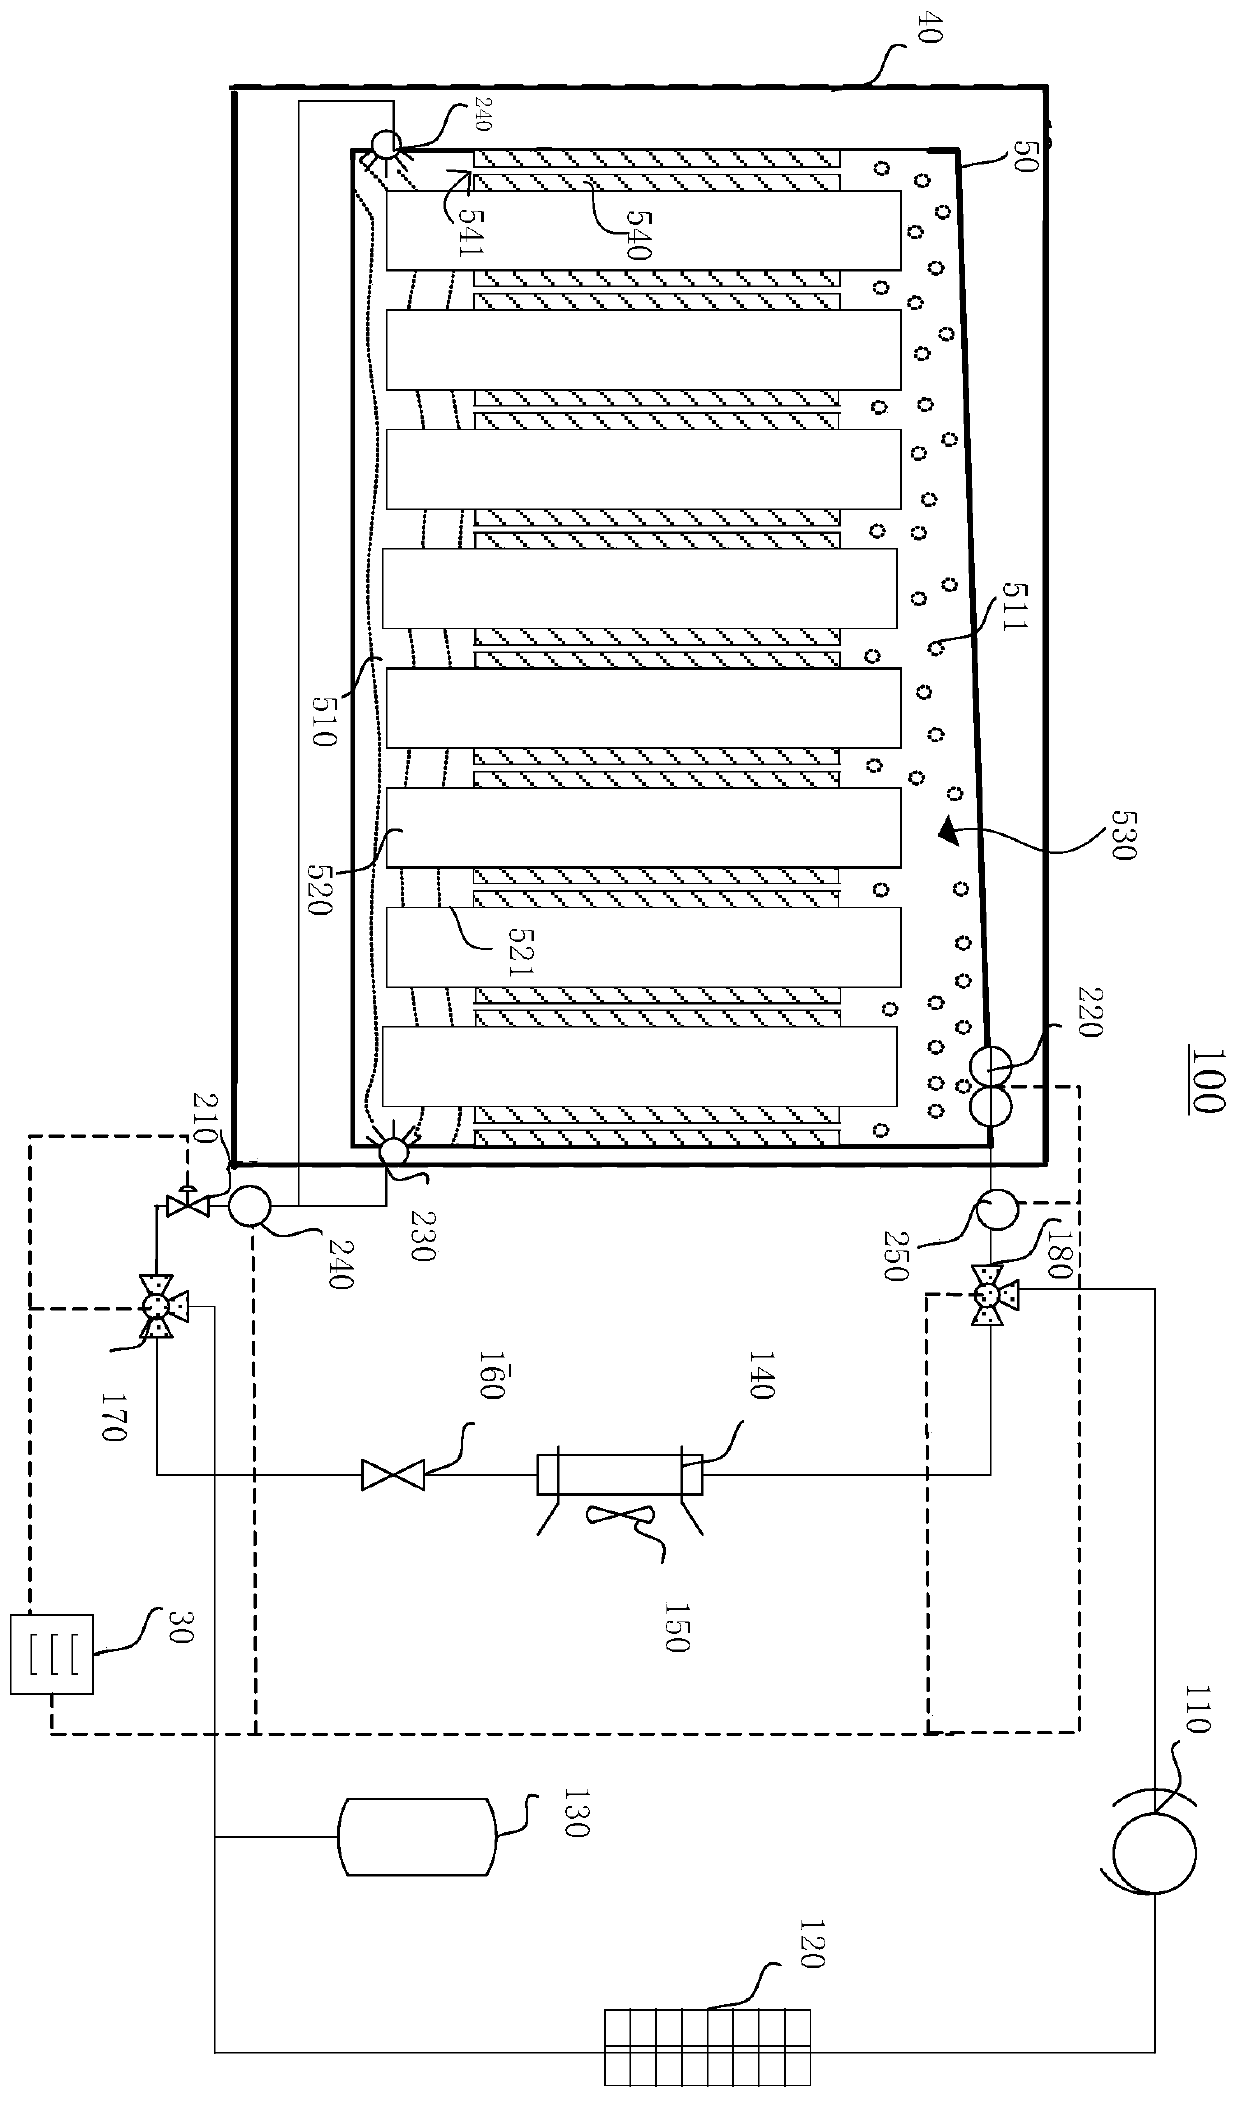 Power battery pack forced circulation system based on two-phase flow heat transfer and control method